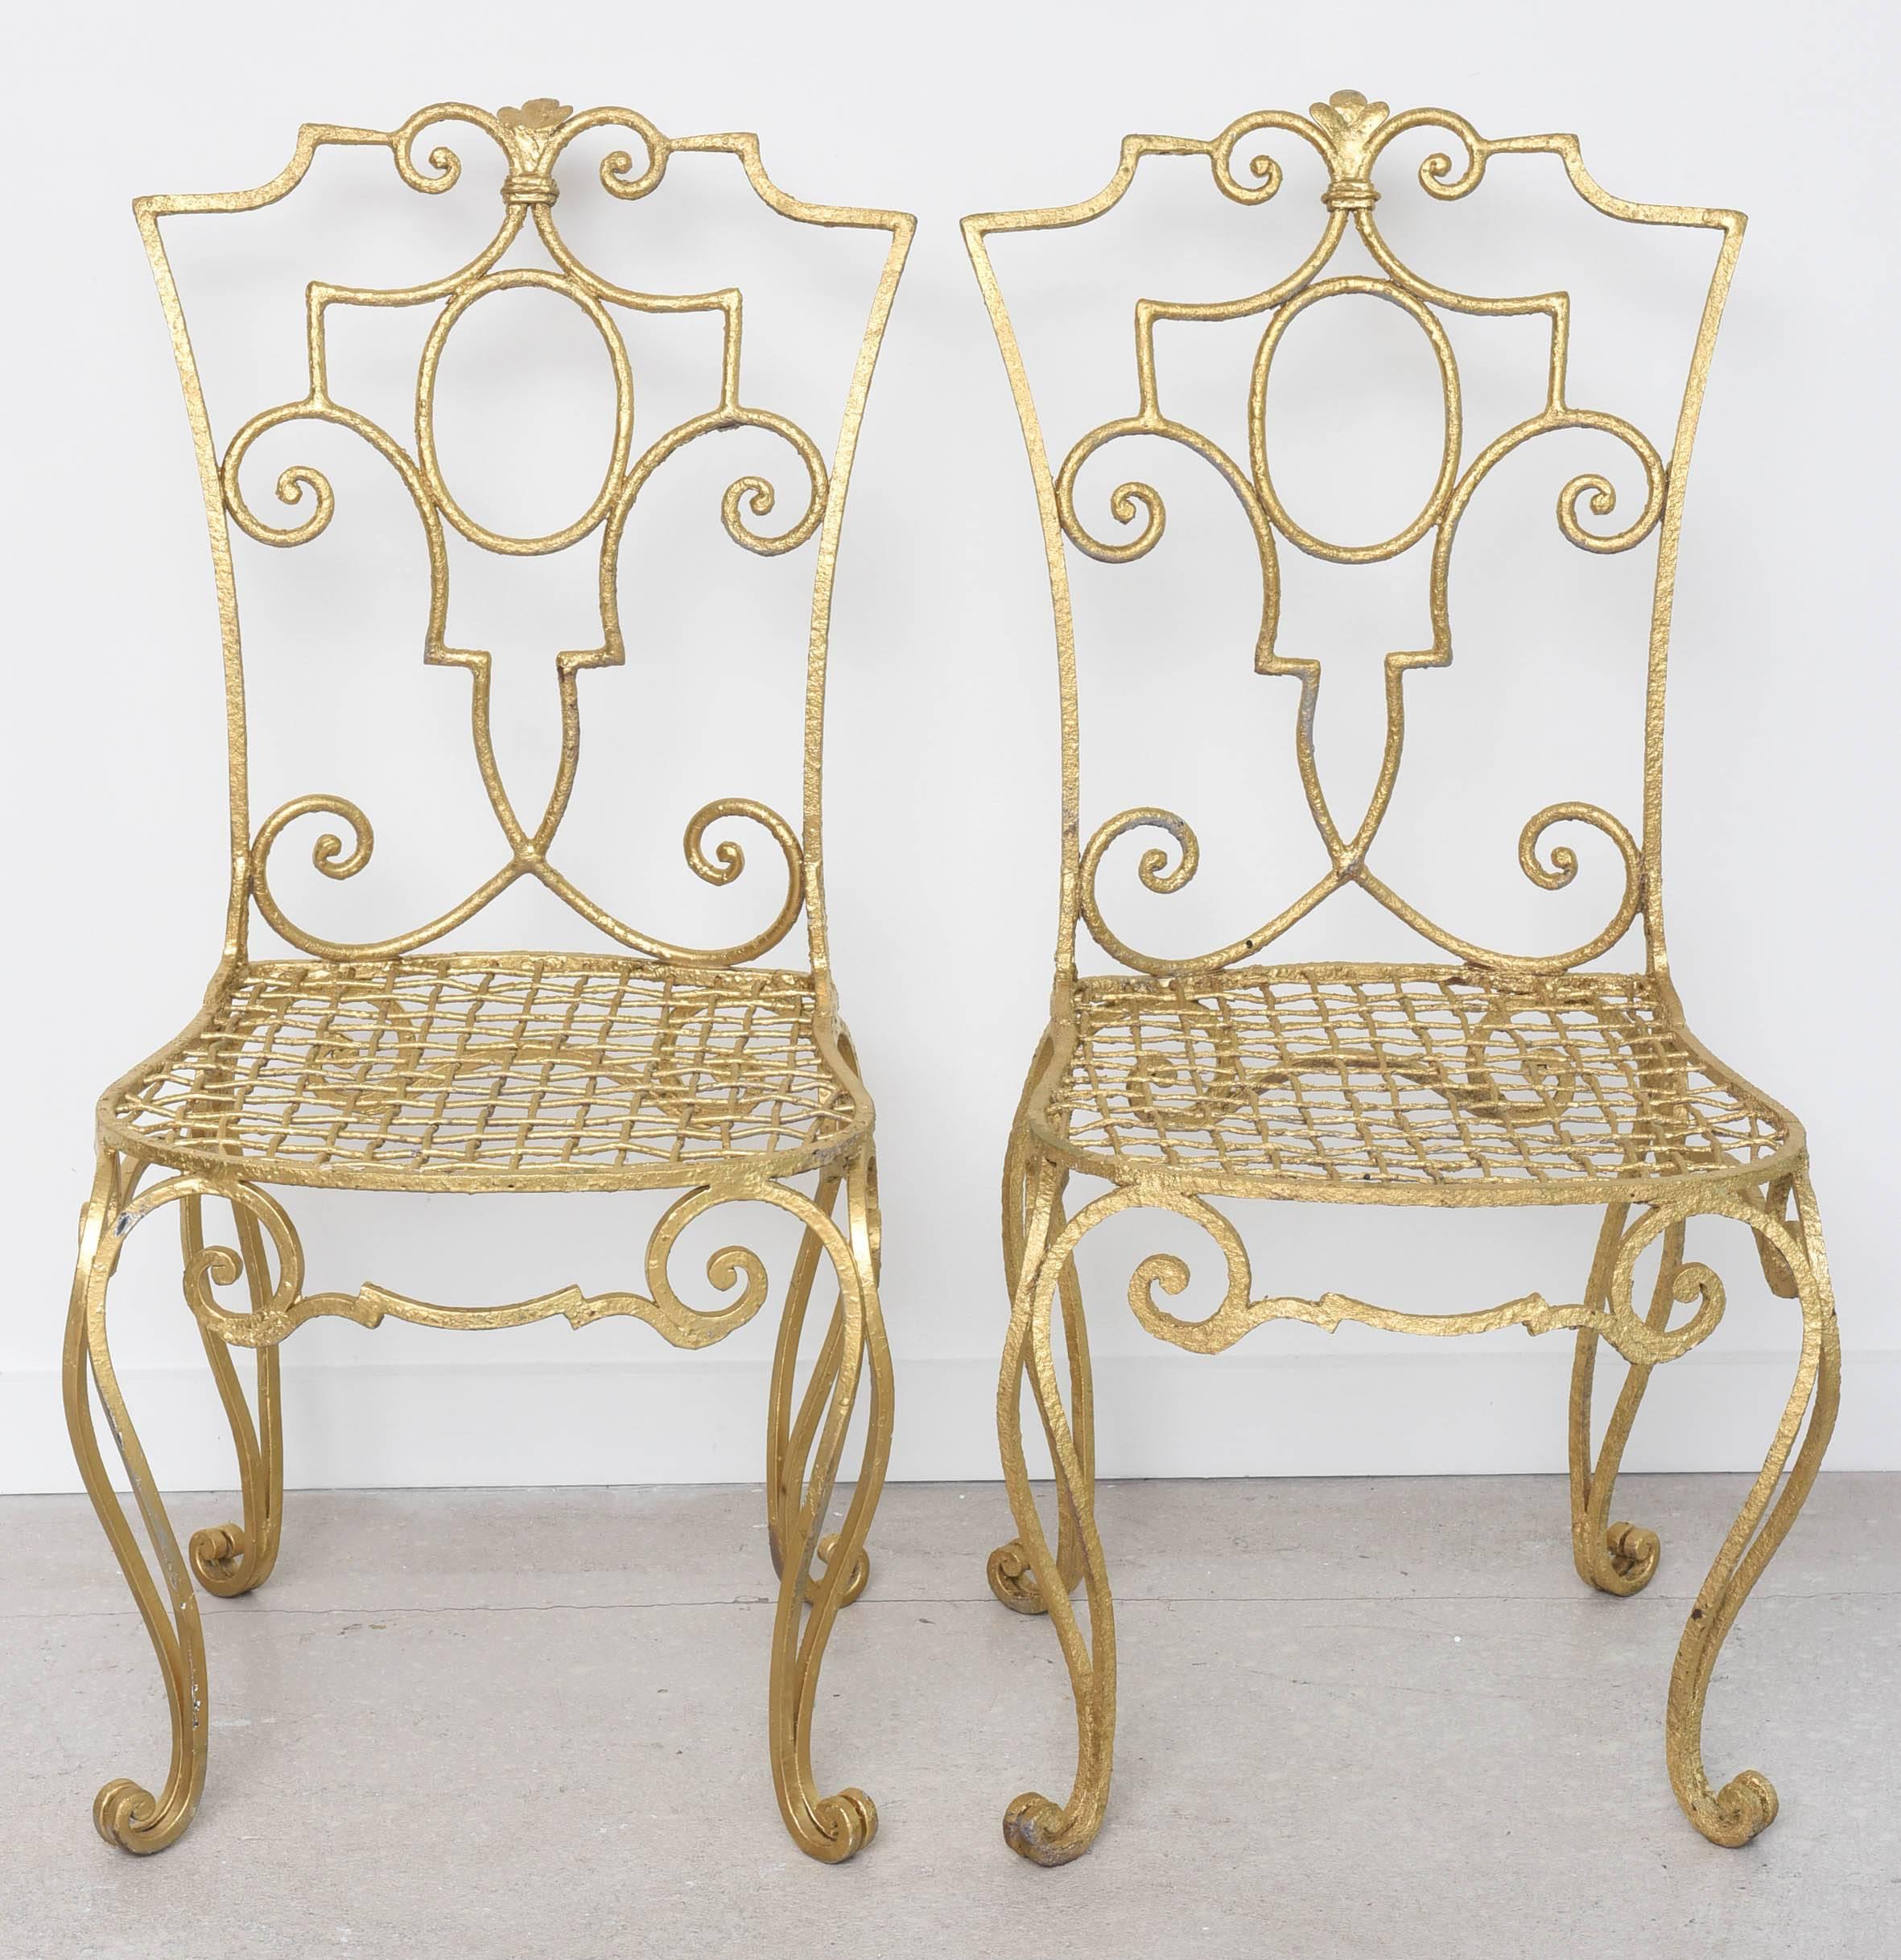 Pair of gilt metal chairs by Jean-Charles Moreux.